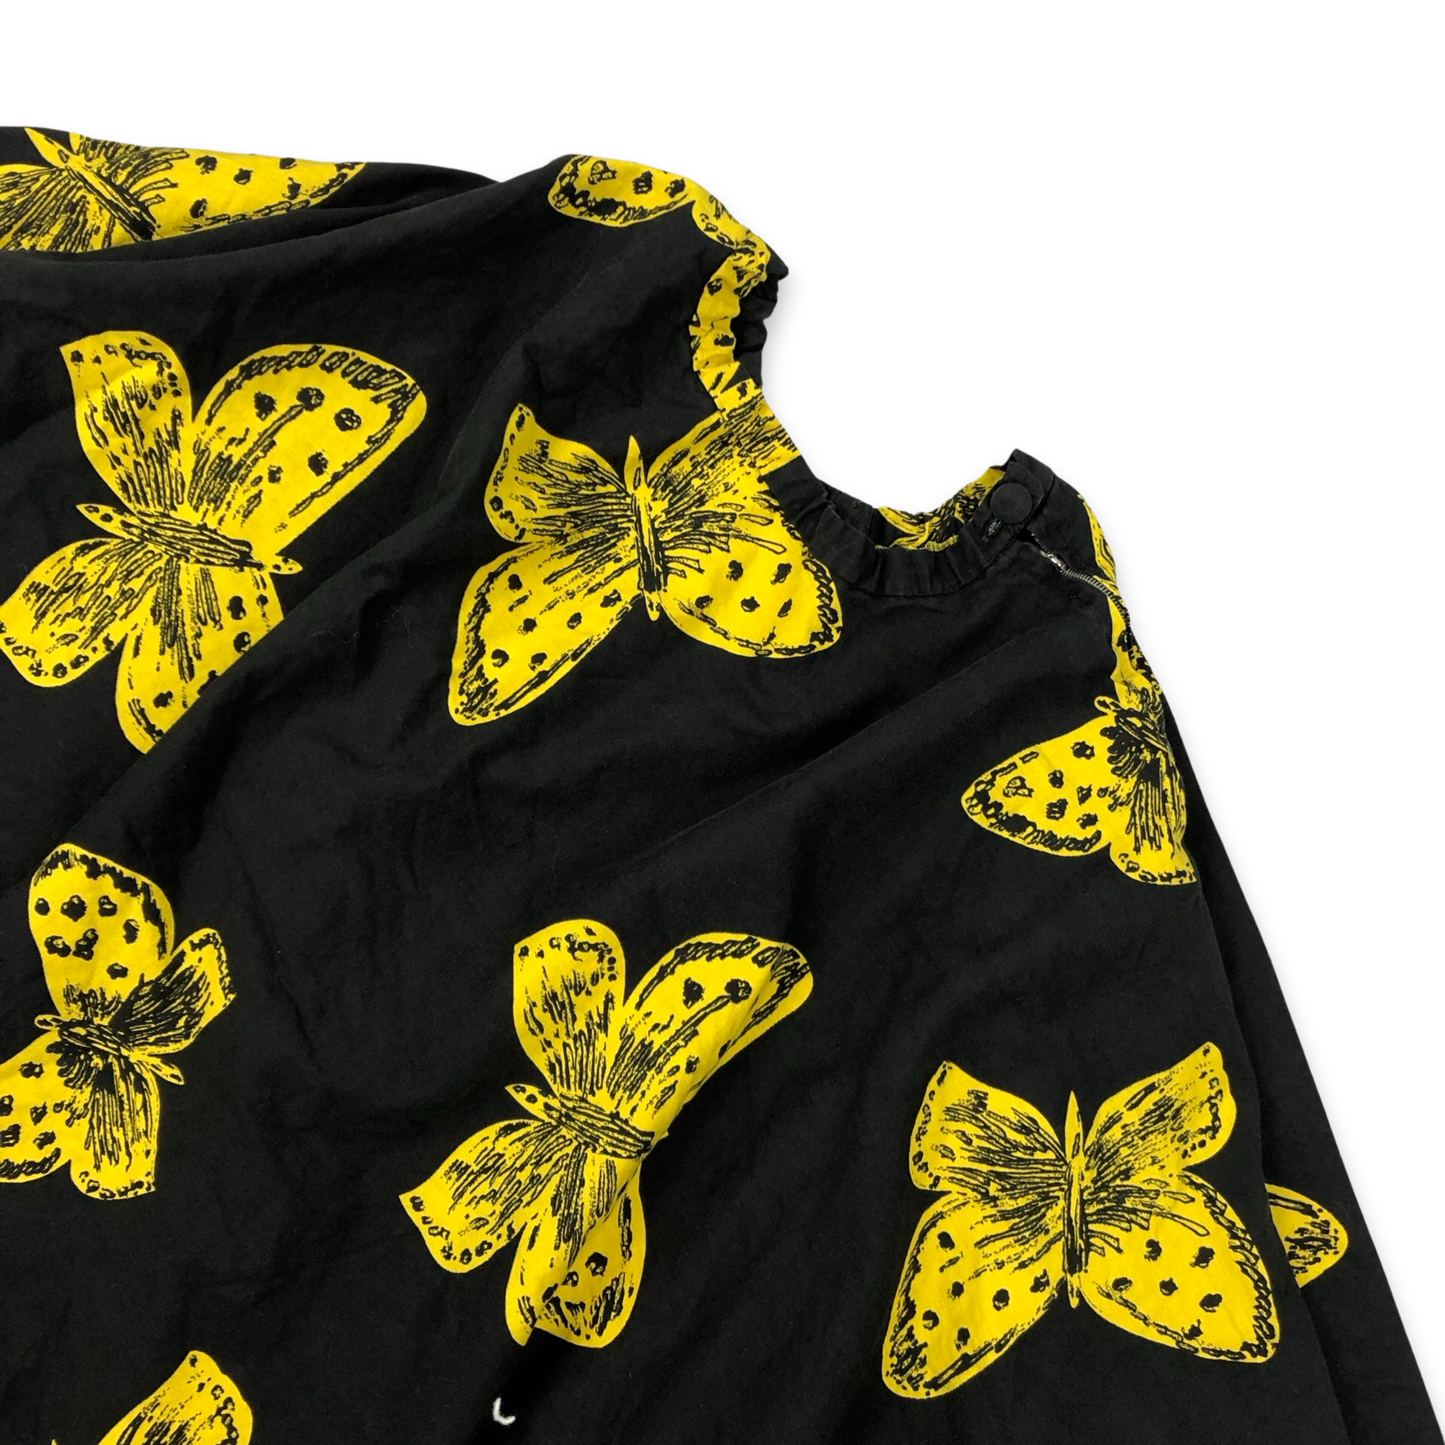 Vintage Viscose Black and Yellow Butterfly Print Midi Skirt 6